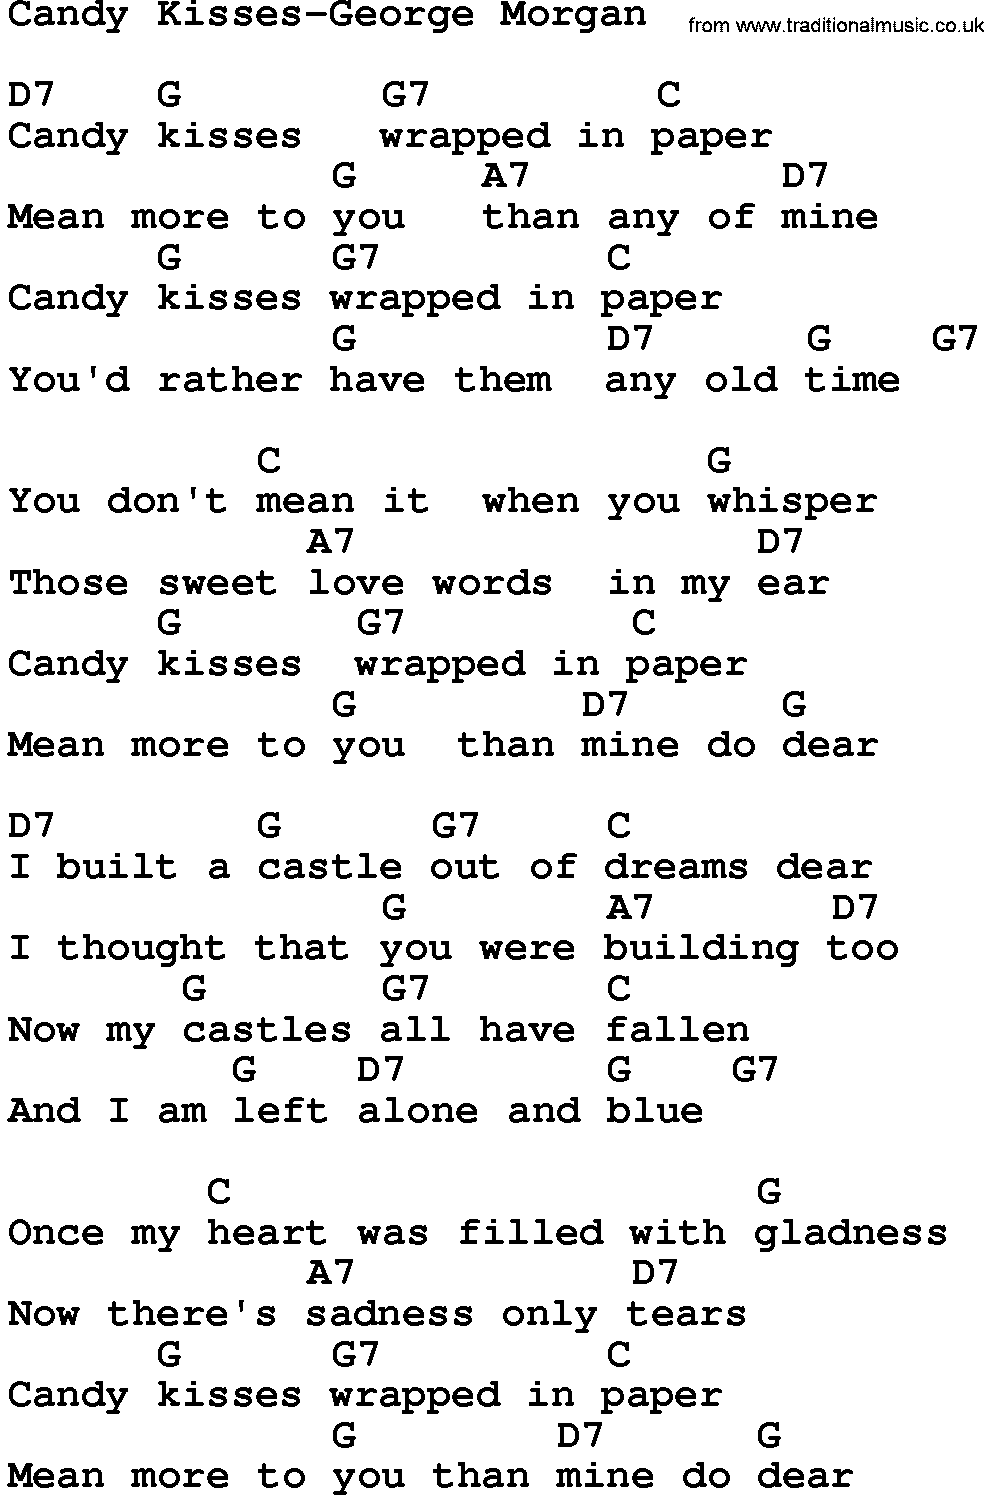 Country music song: Candy Kisses-George Morgan lyrics and chords